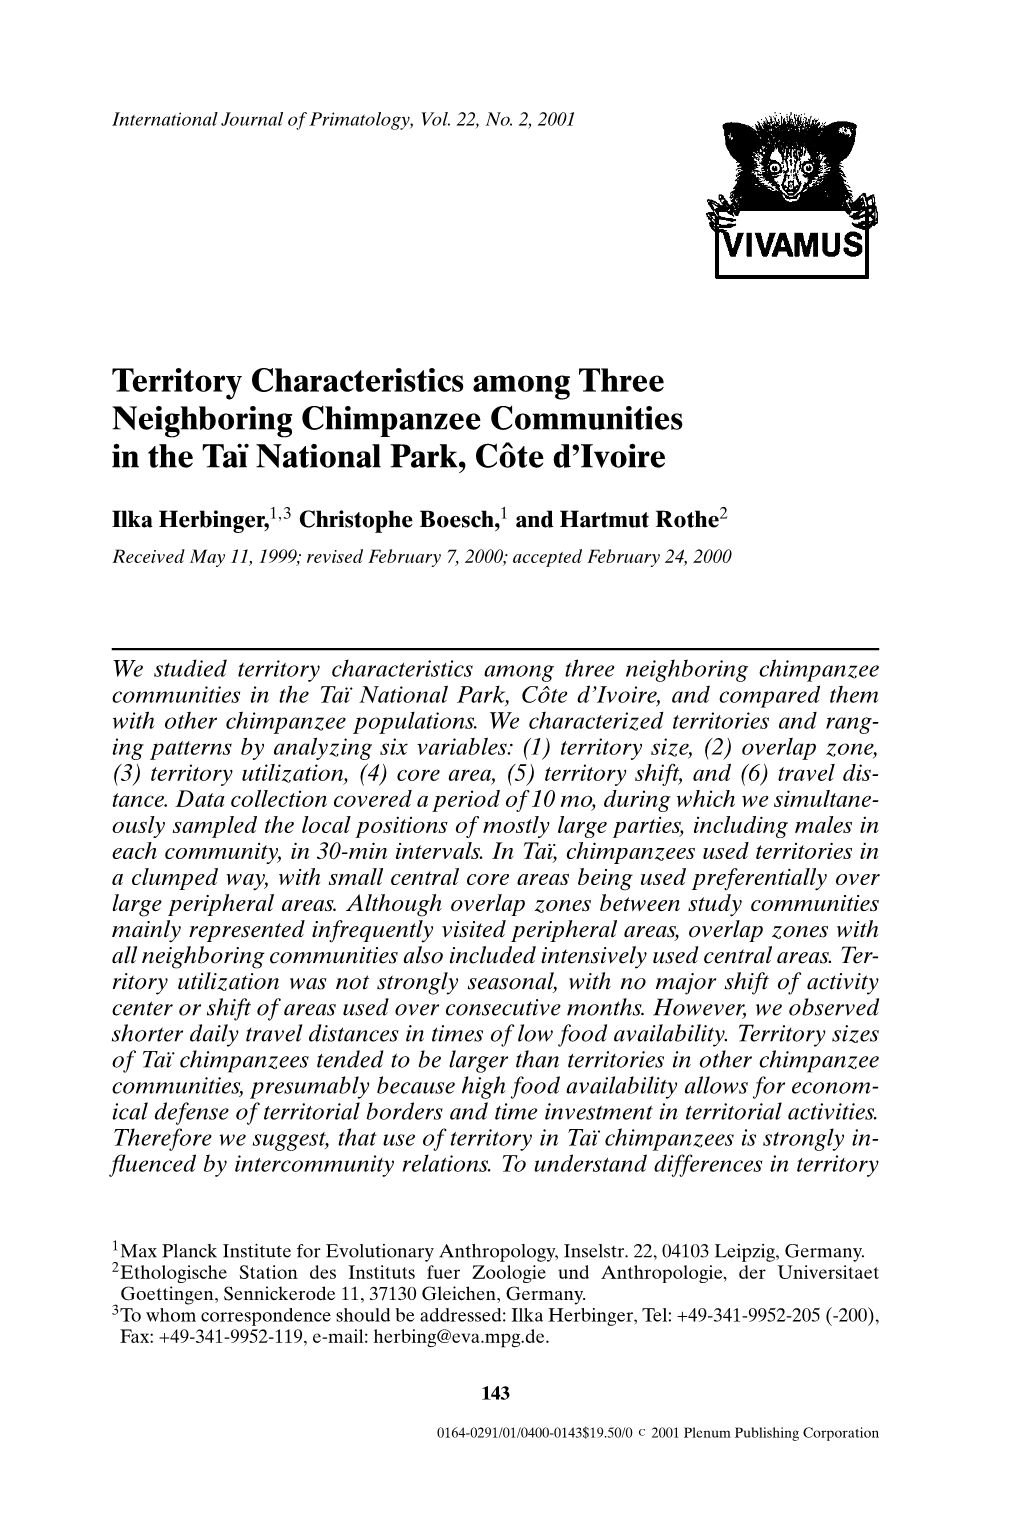 Territory Characteristics Among Three Neighboring Chimpanzee Communities in the Taı¨ National Park, Coteˆ D’Ivoire